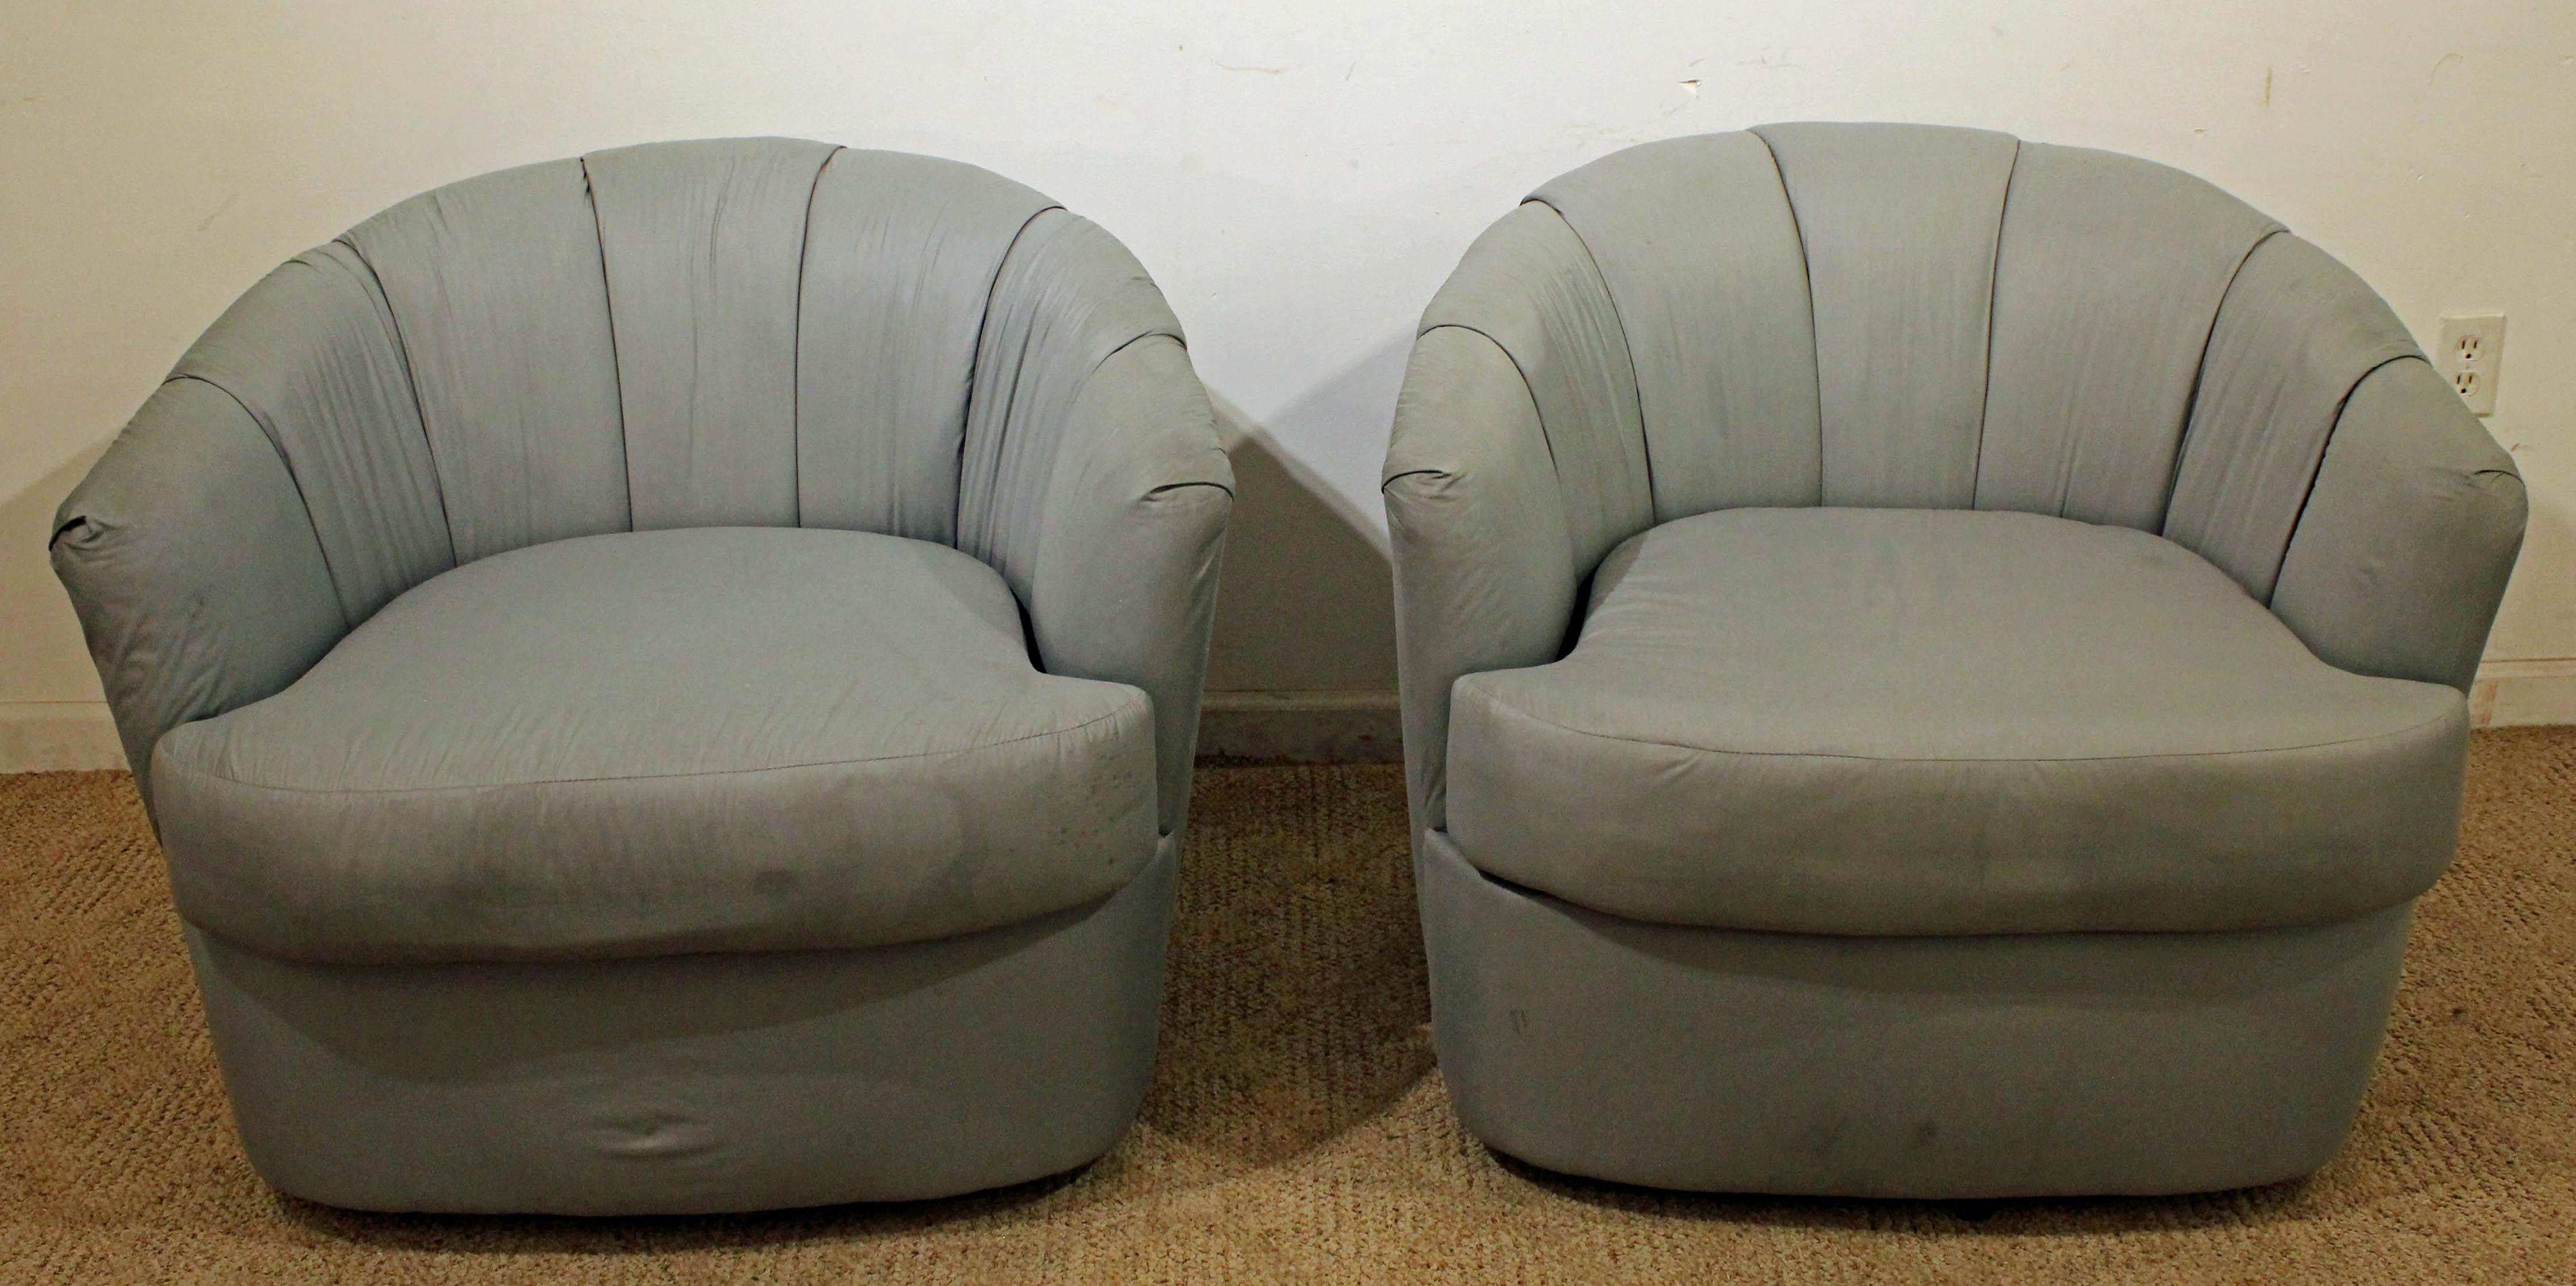 Offered is a pair of Mid-Century Modern swivel chairs. They were designed for Selig. They are in decent condition, but need to be reupholstered, showing age wear (minor tears, stains, age wear-see pics). They are signed by Selig.

Dimensions:
31